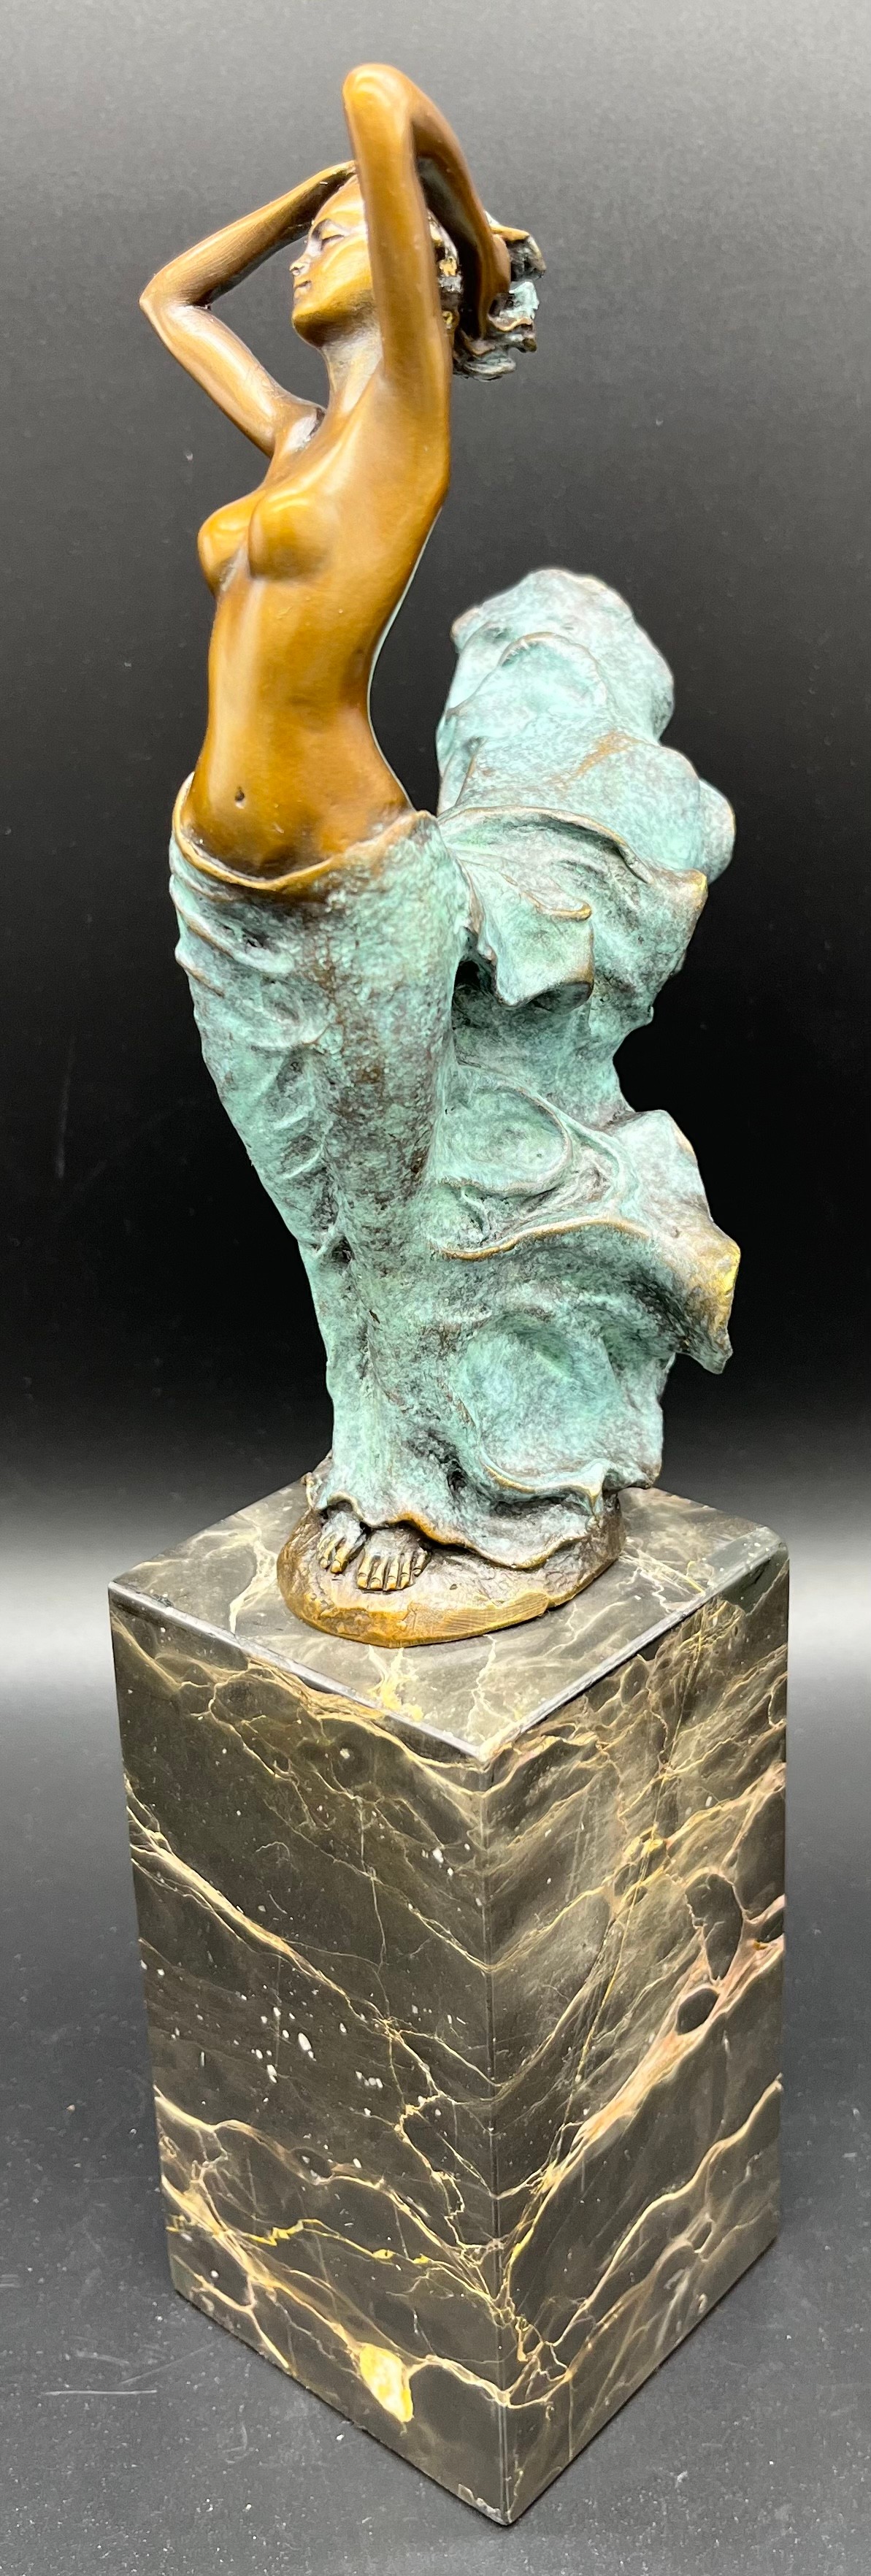 A Bronze statue of a Serene Art Nouveau nude lady figurine, mounted on a veined Marble base. - Image 4 of 5